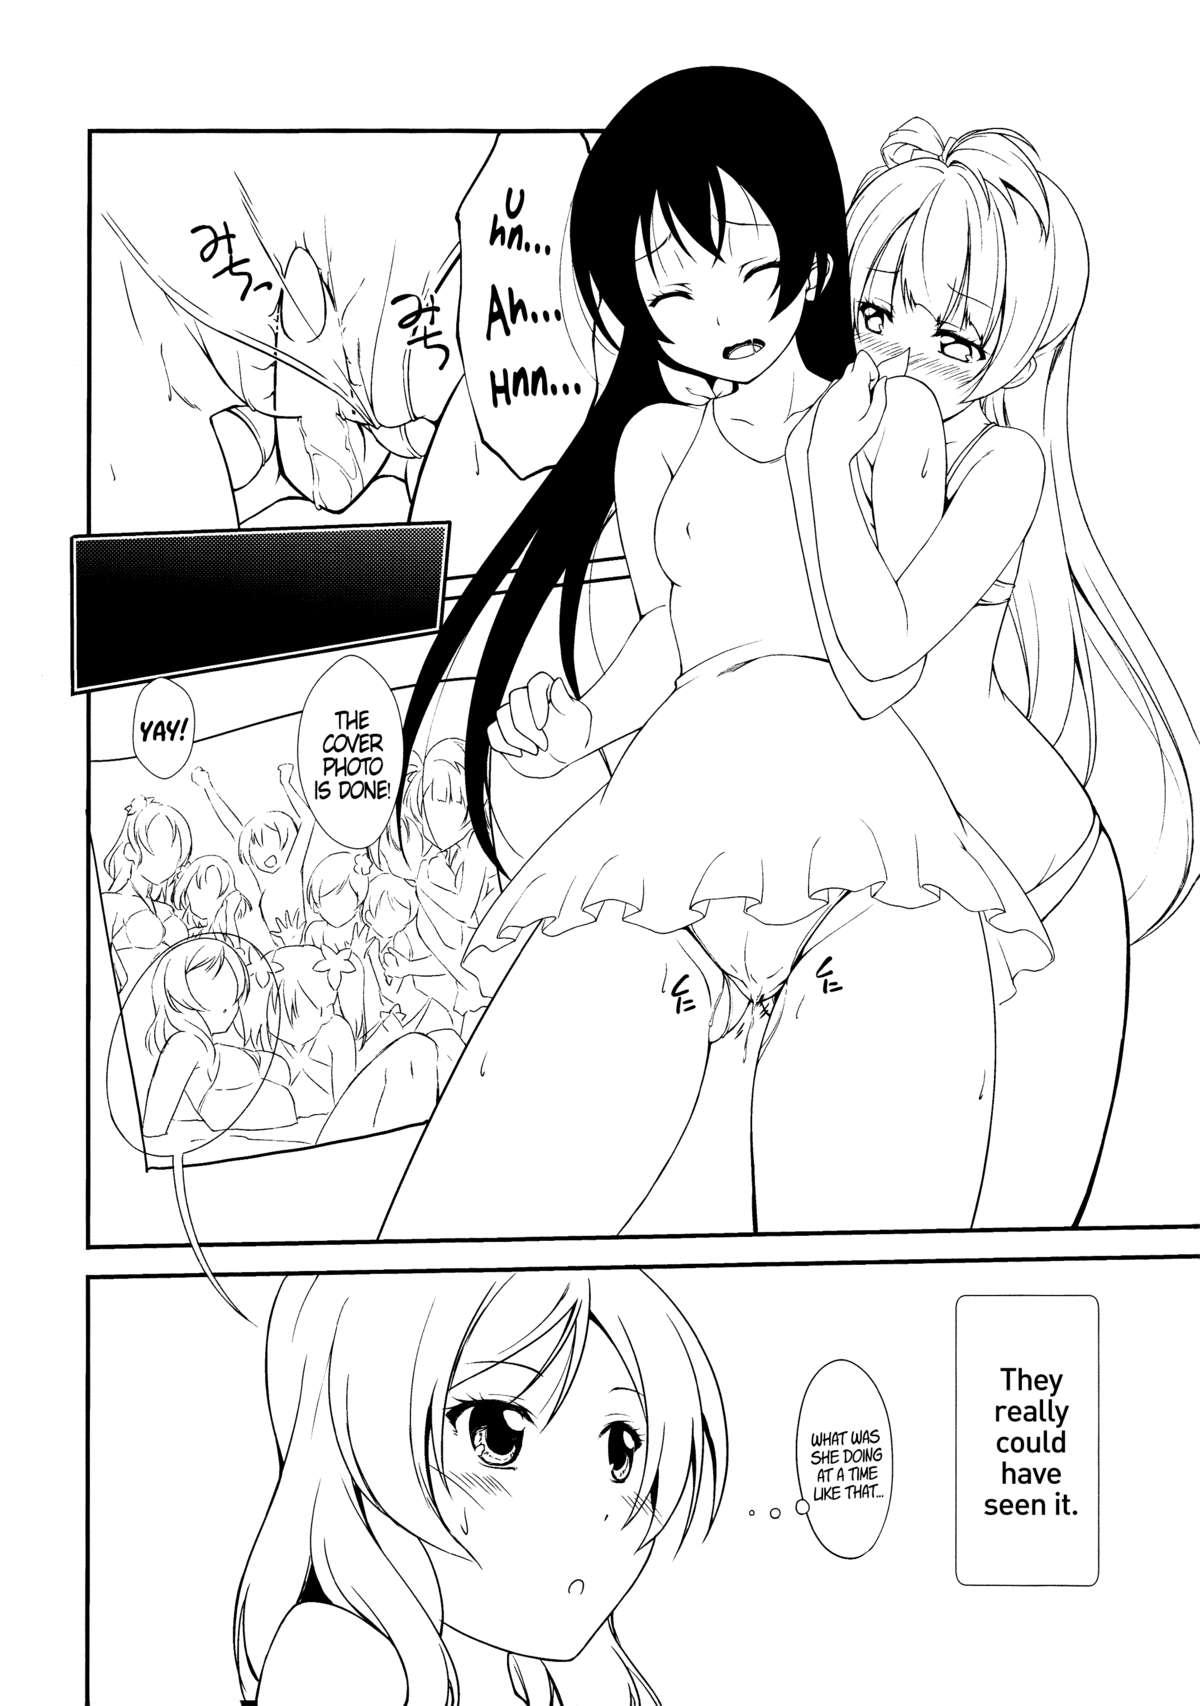 Doctor Sex Chocolate Fever - Love live Storyline - Page 4